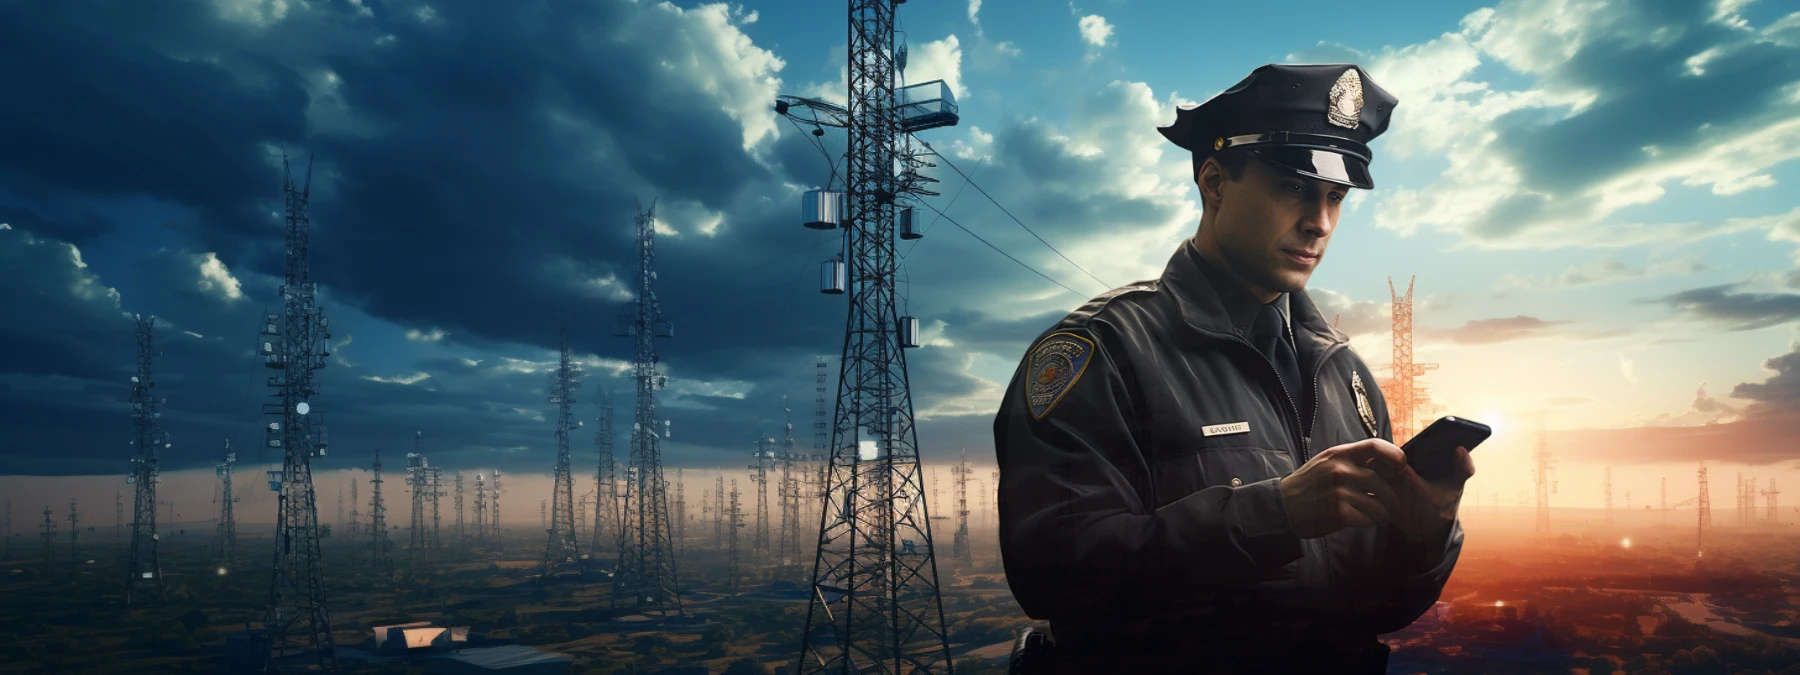 Featured image for “A cops guide to cellular network investigations”